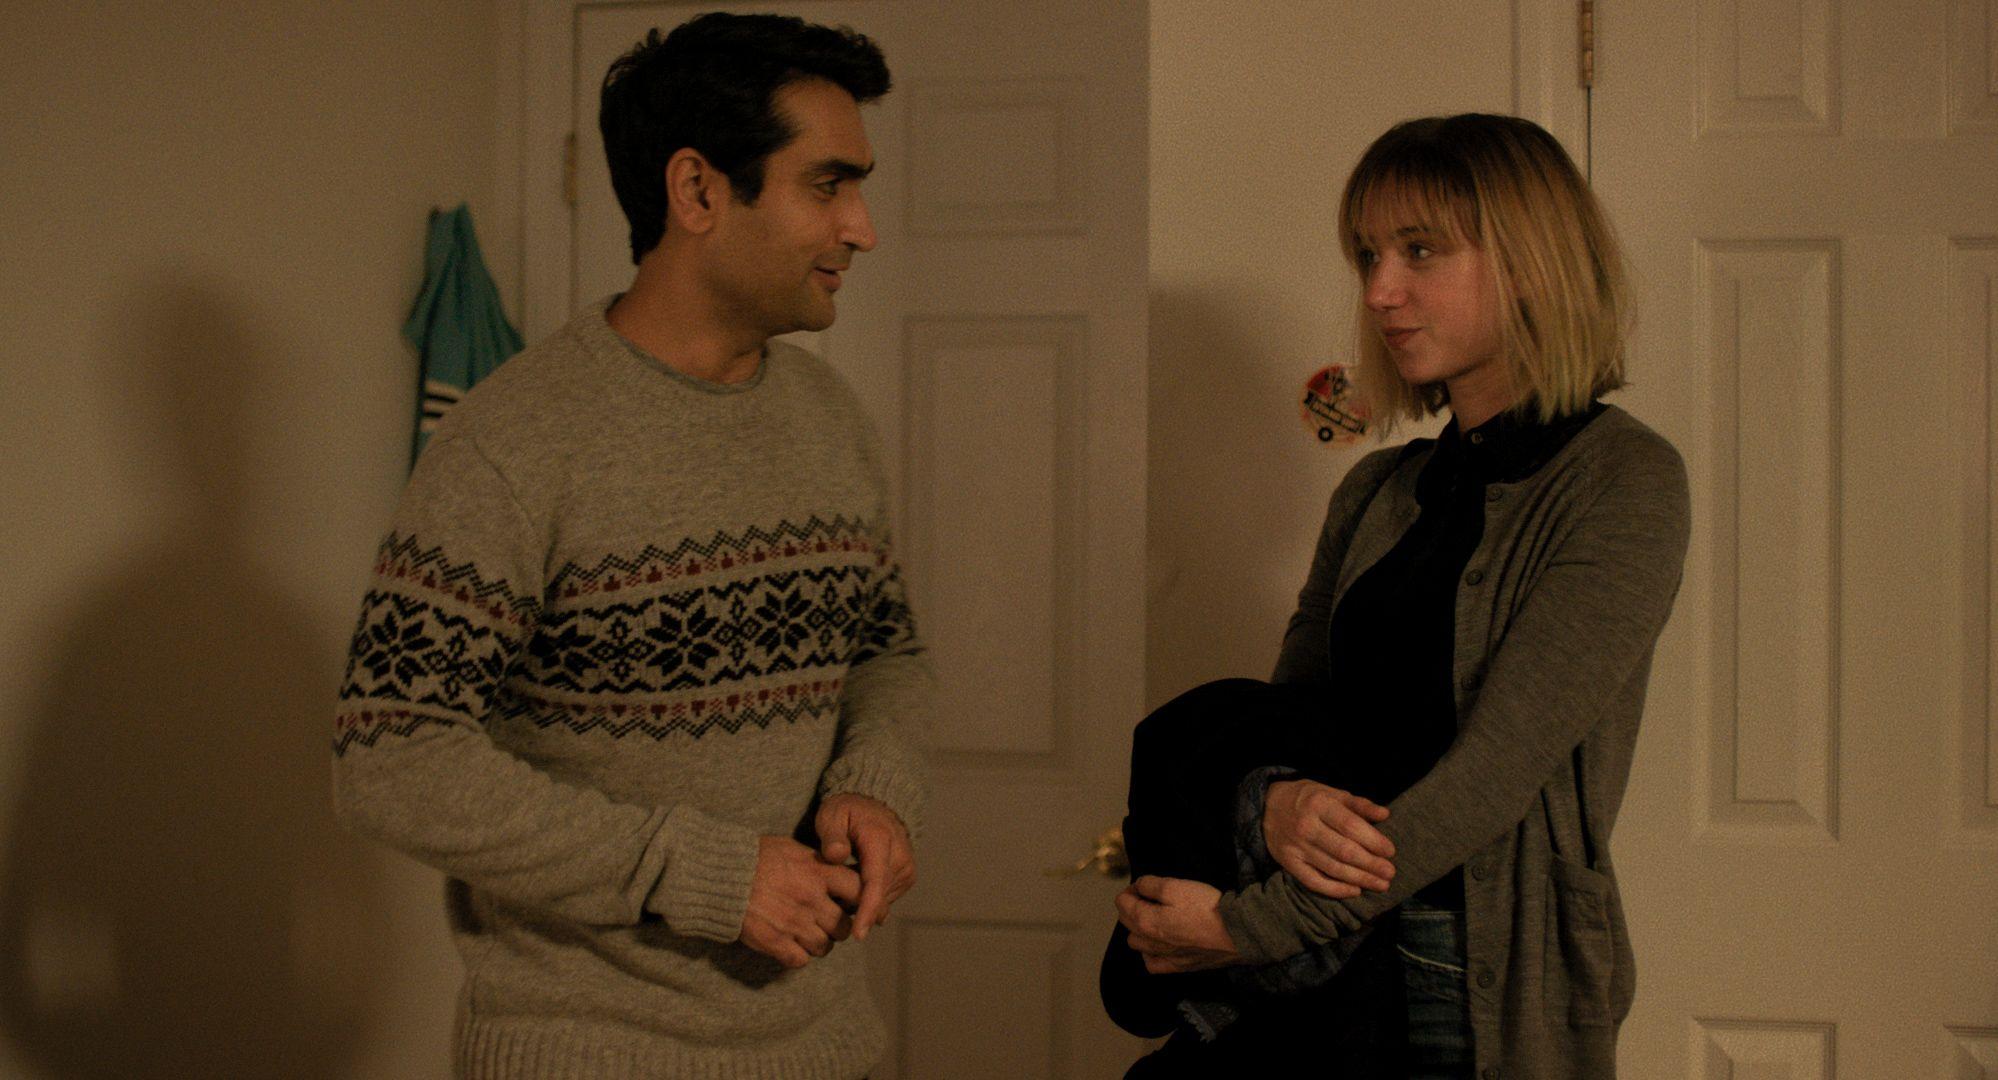 The Big Sick Wallpapers